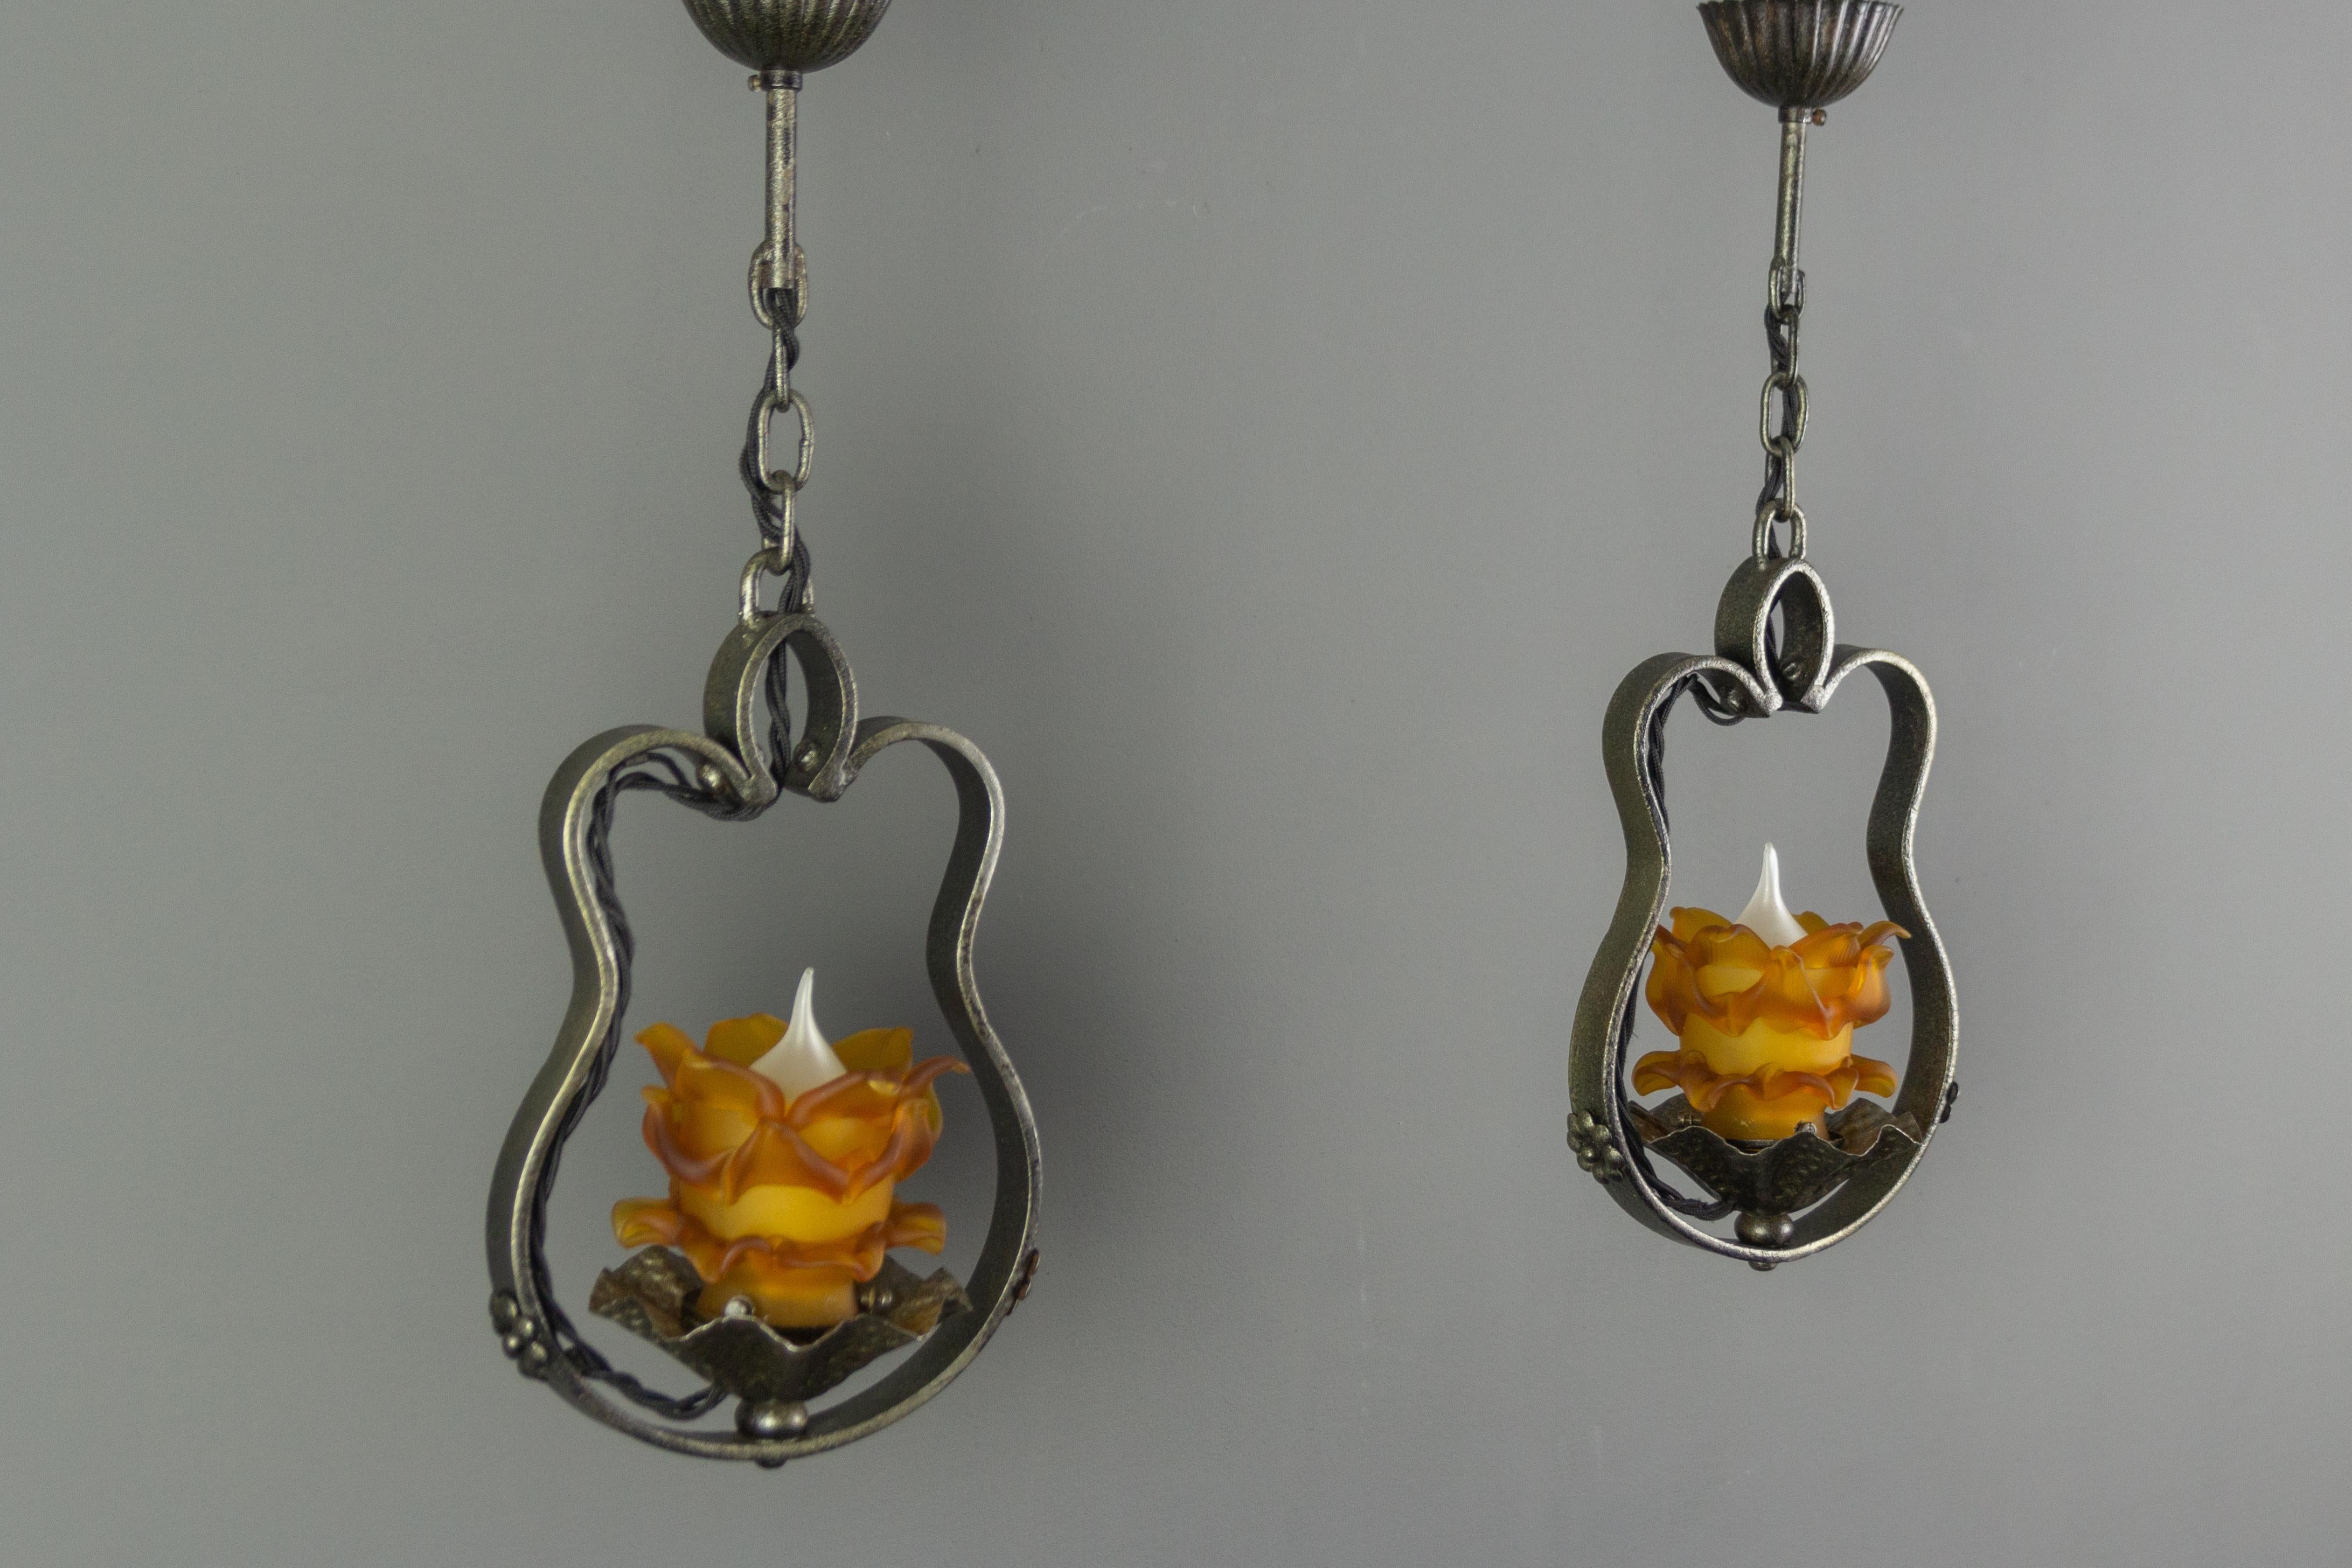 Pair of French Wrought Iron and Orange Glass Flower Shaped Pendant Lights 3